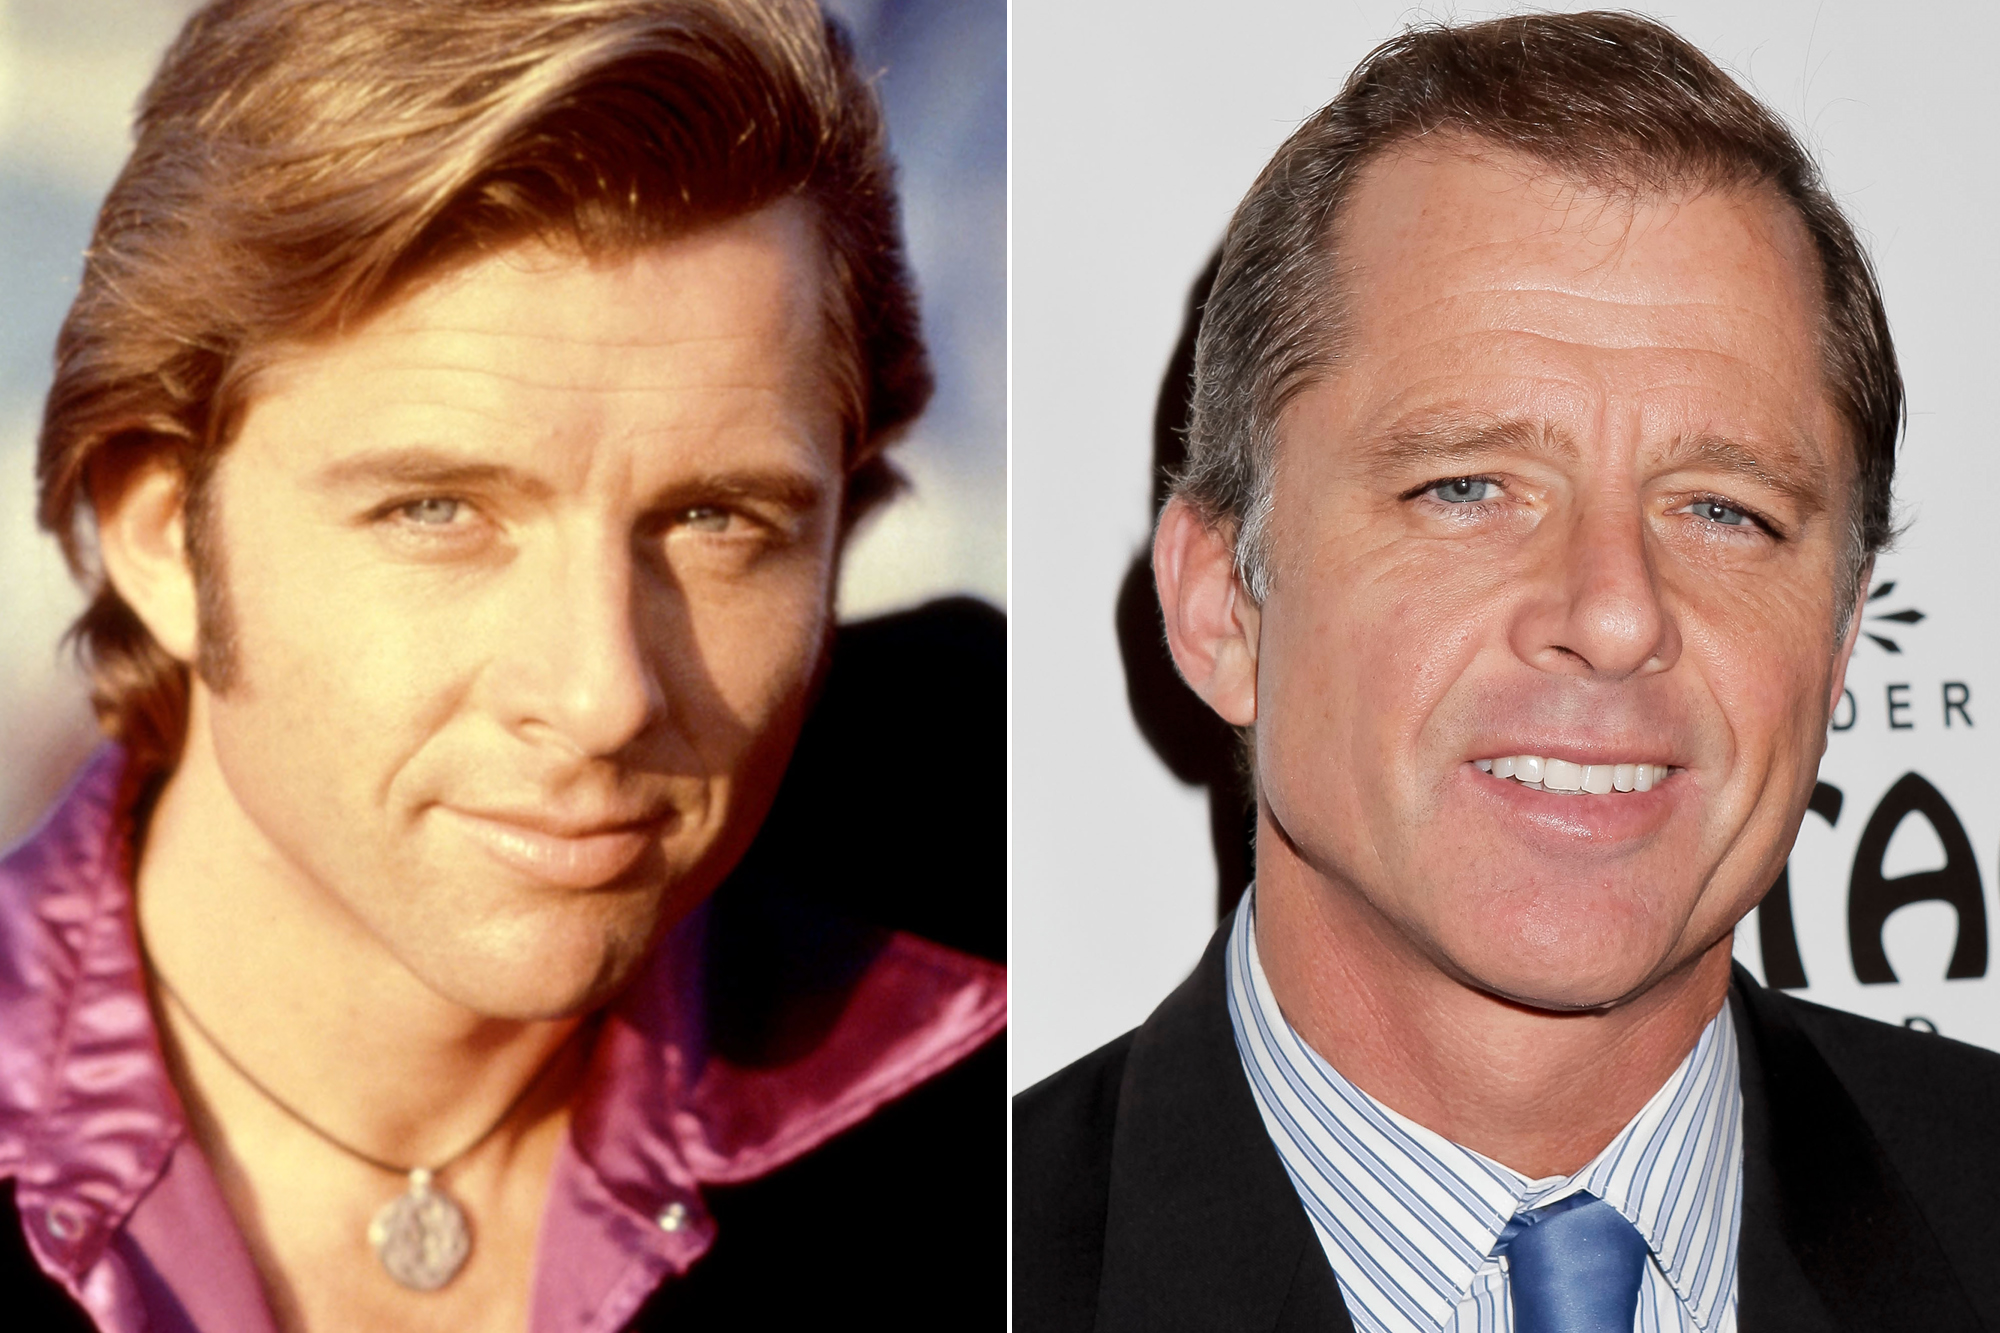 Maxwell Caulfield, who played Rex Manning, has spent the years following 'Empire Records' channeling his dulcet tones into voice work for TV shows like 'Modern Family' and 'Castle' and appearing in theater productions including 'Chicago.'